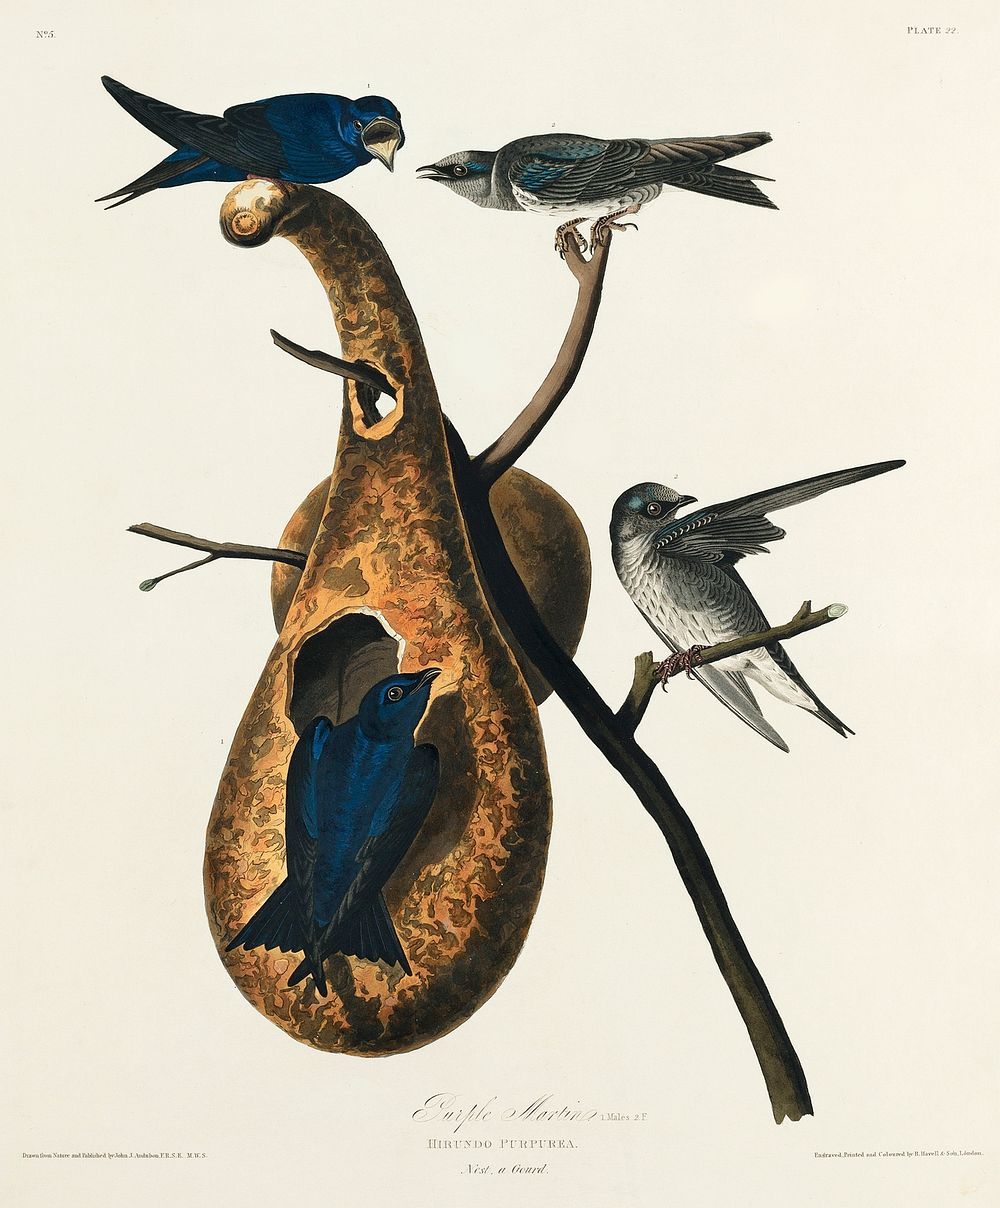 Purple Martin from Birds of America (1827) by John James Audubon, etched by William Home Lizars. Original from University of…